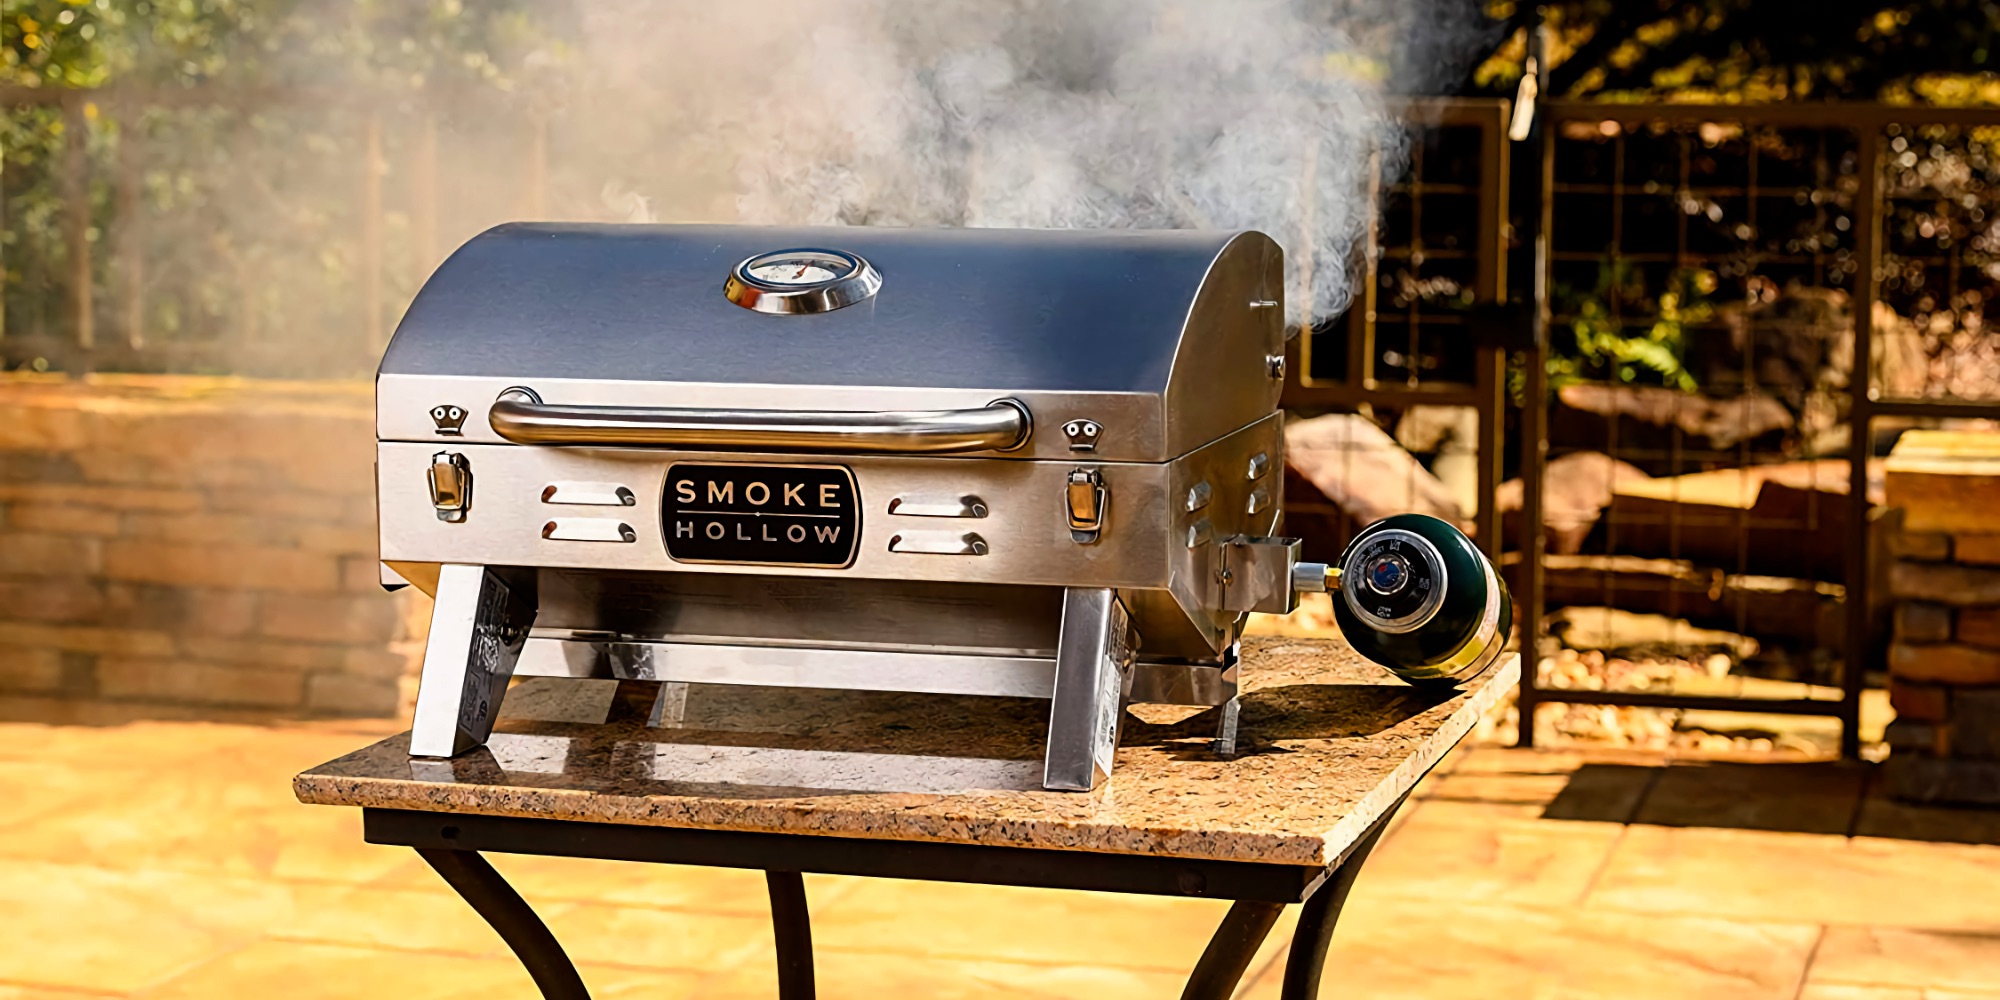 The 9 Best Grills of 2023